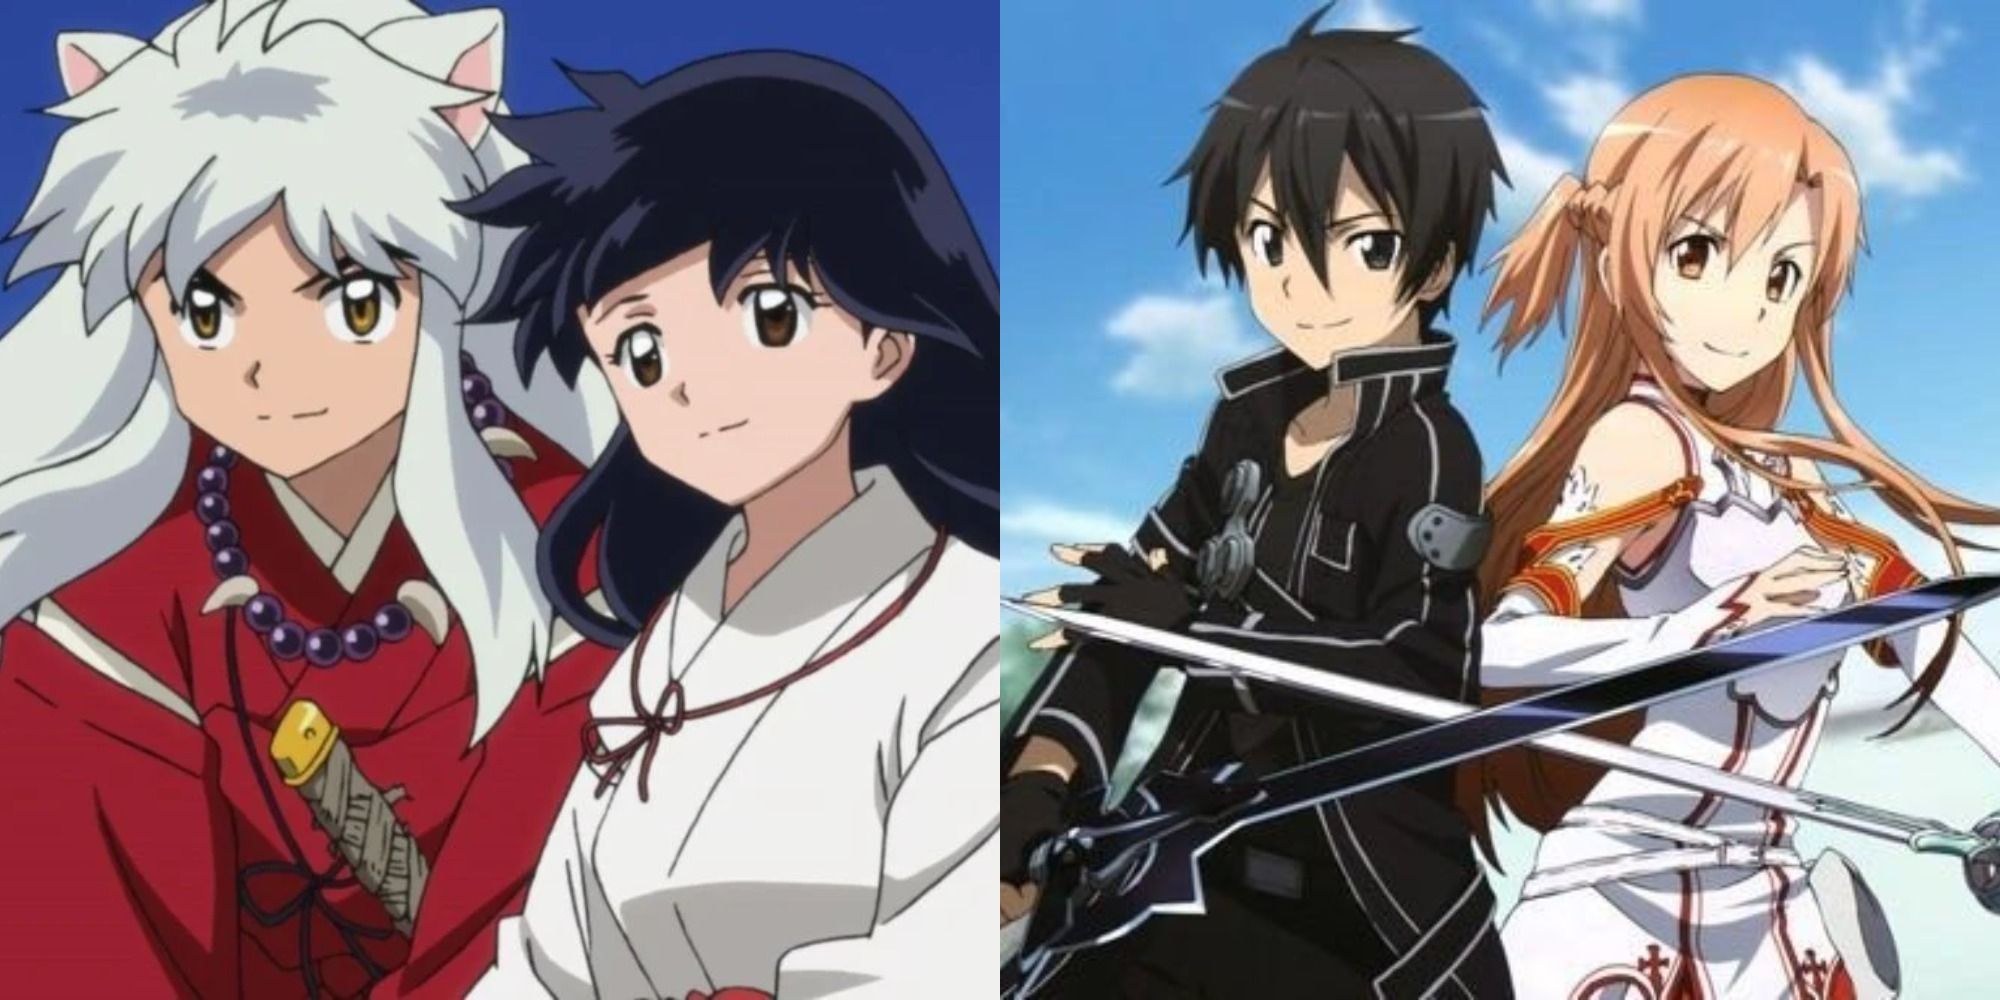 Split image showing Inuyasha and Kagome and Kirito and Asuna in Sword Art Online.